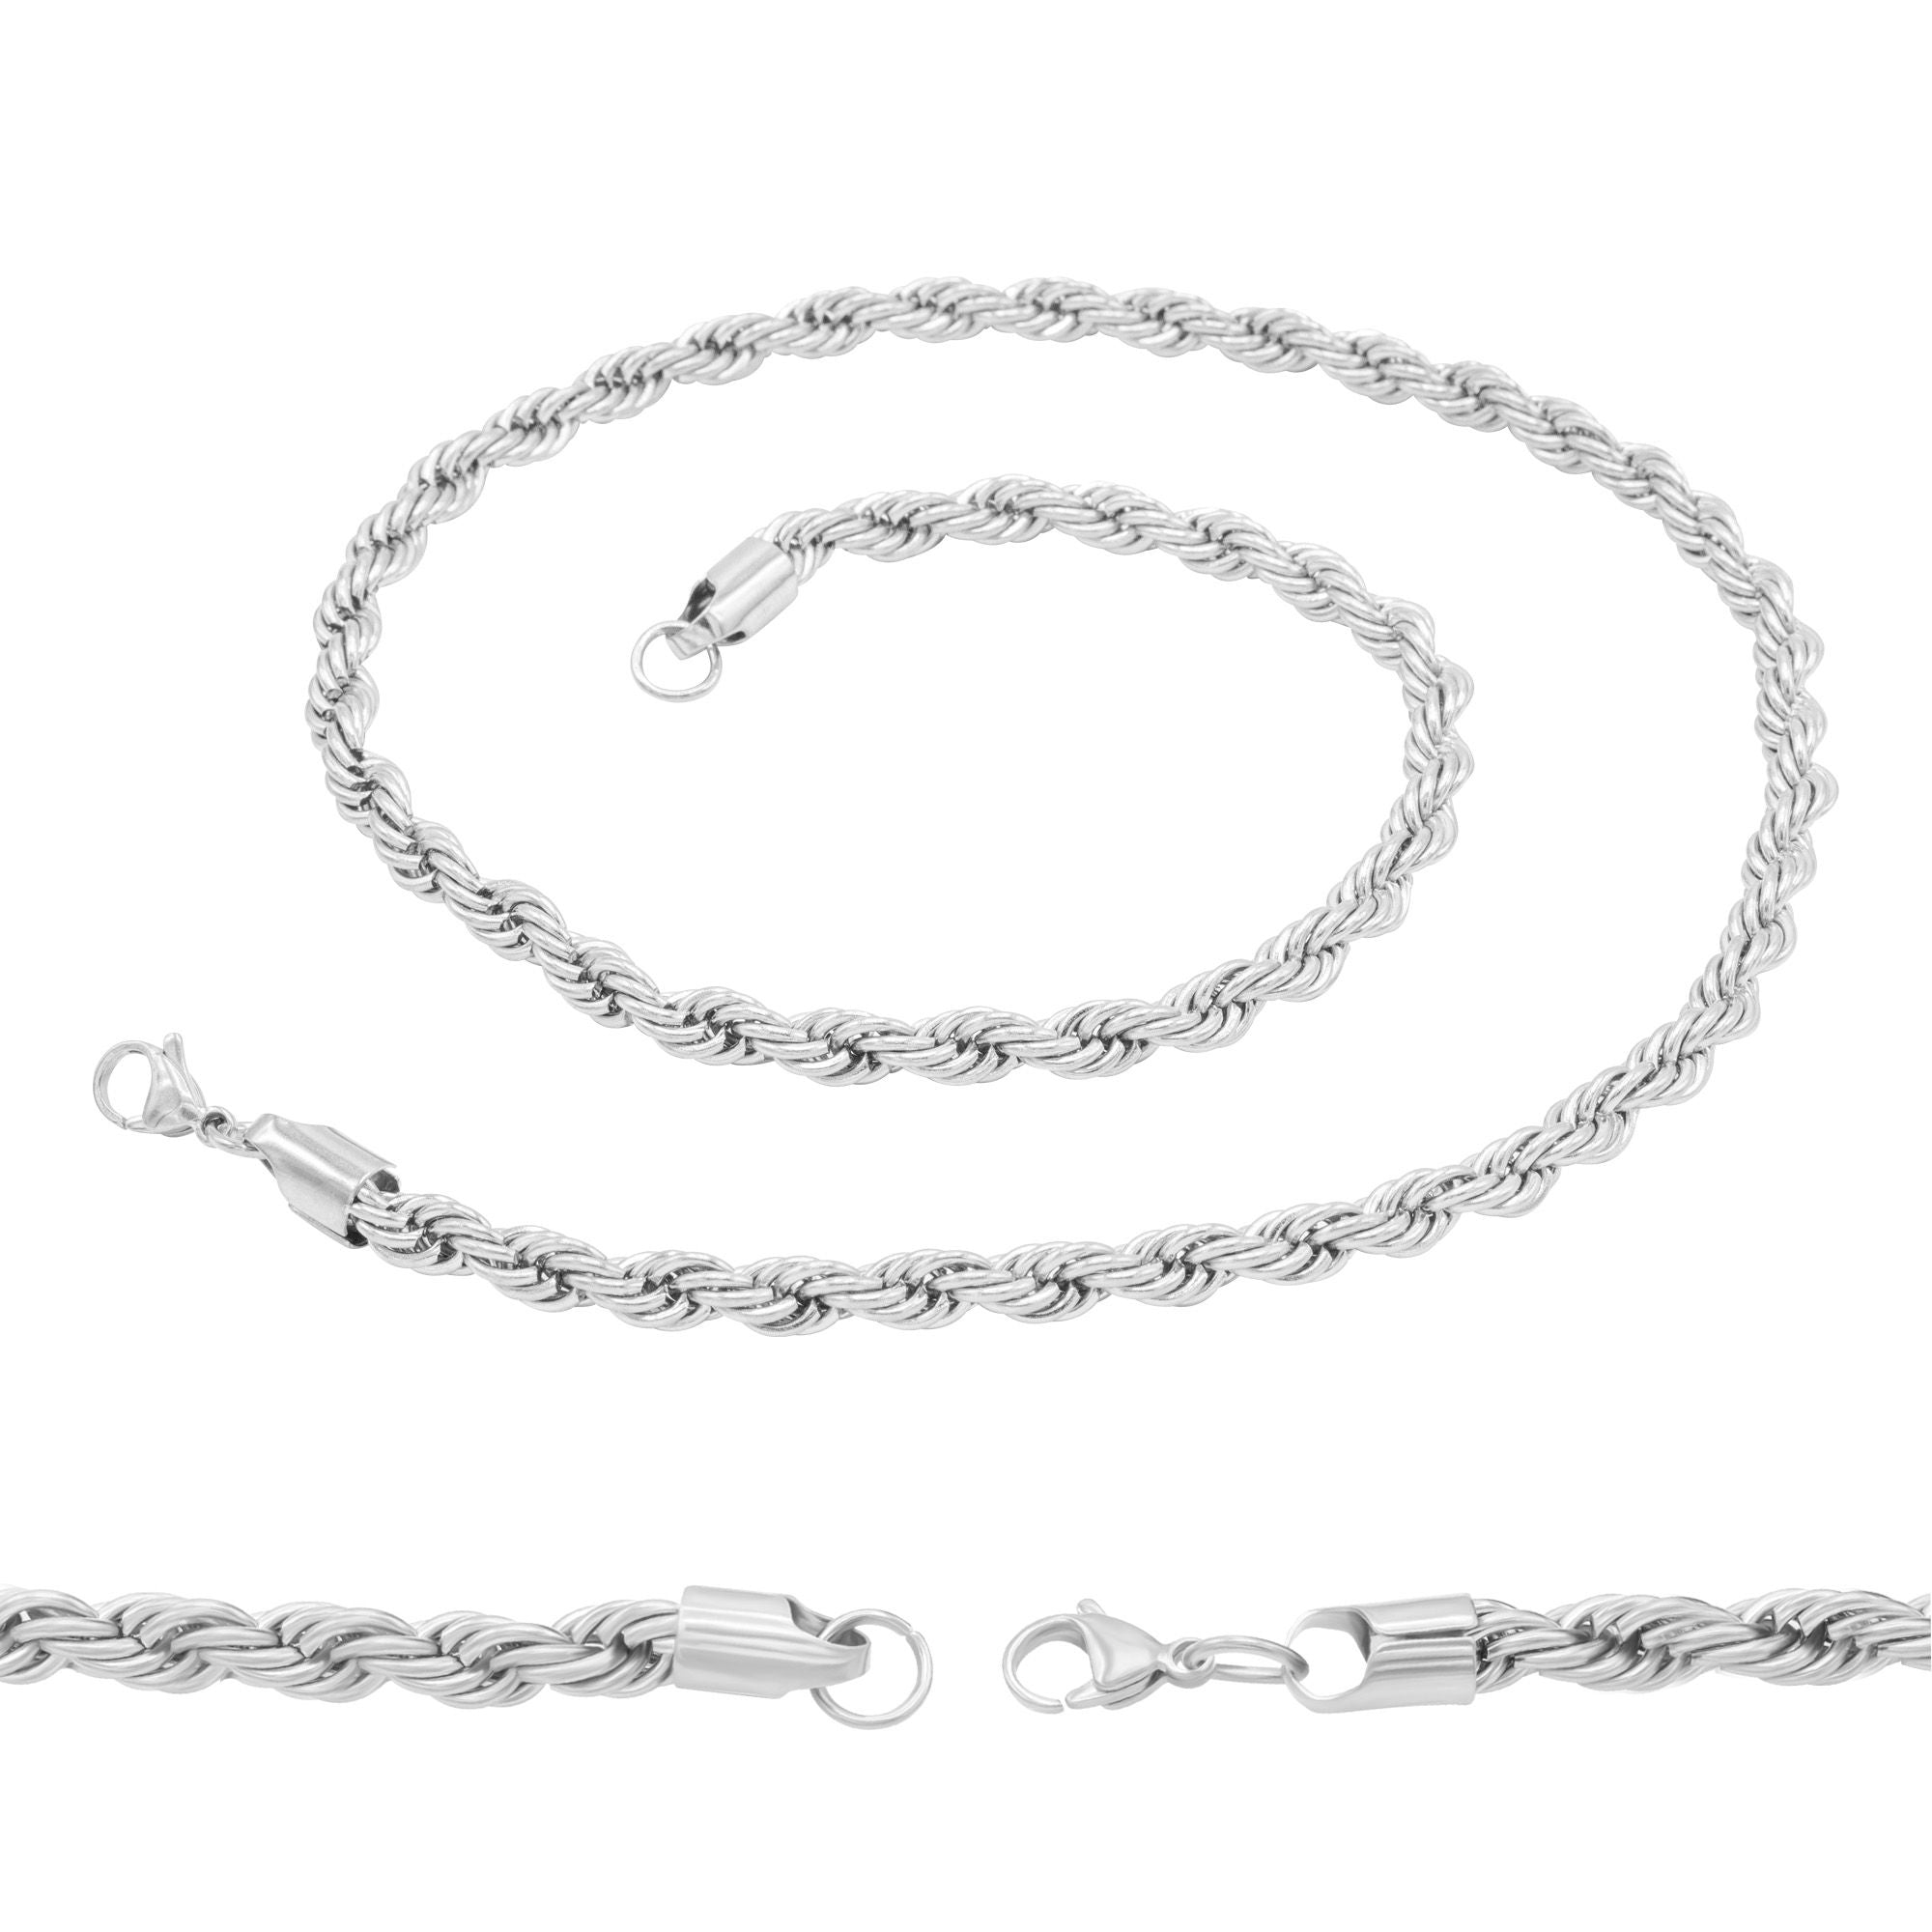 Silver Rope Chain Twisted Link Necklace for Men 18" 20" 24" 30" Length | 2 mm - 7 mm Width